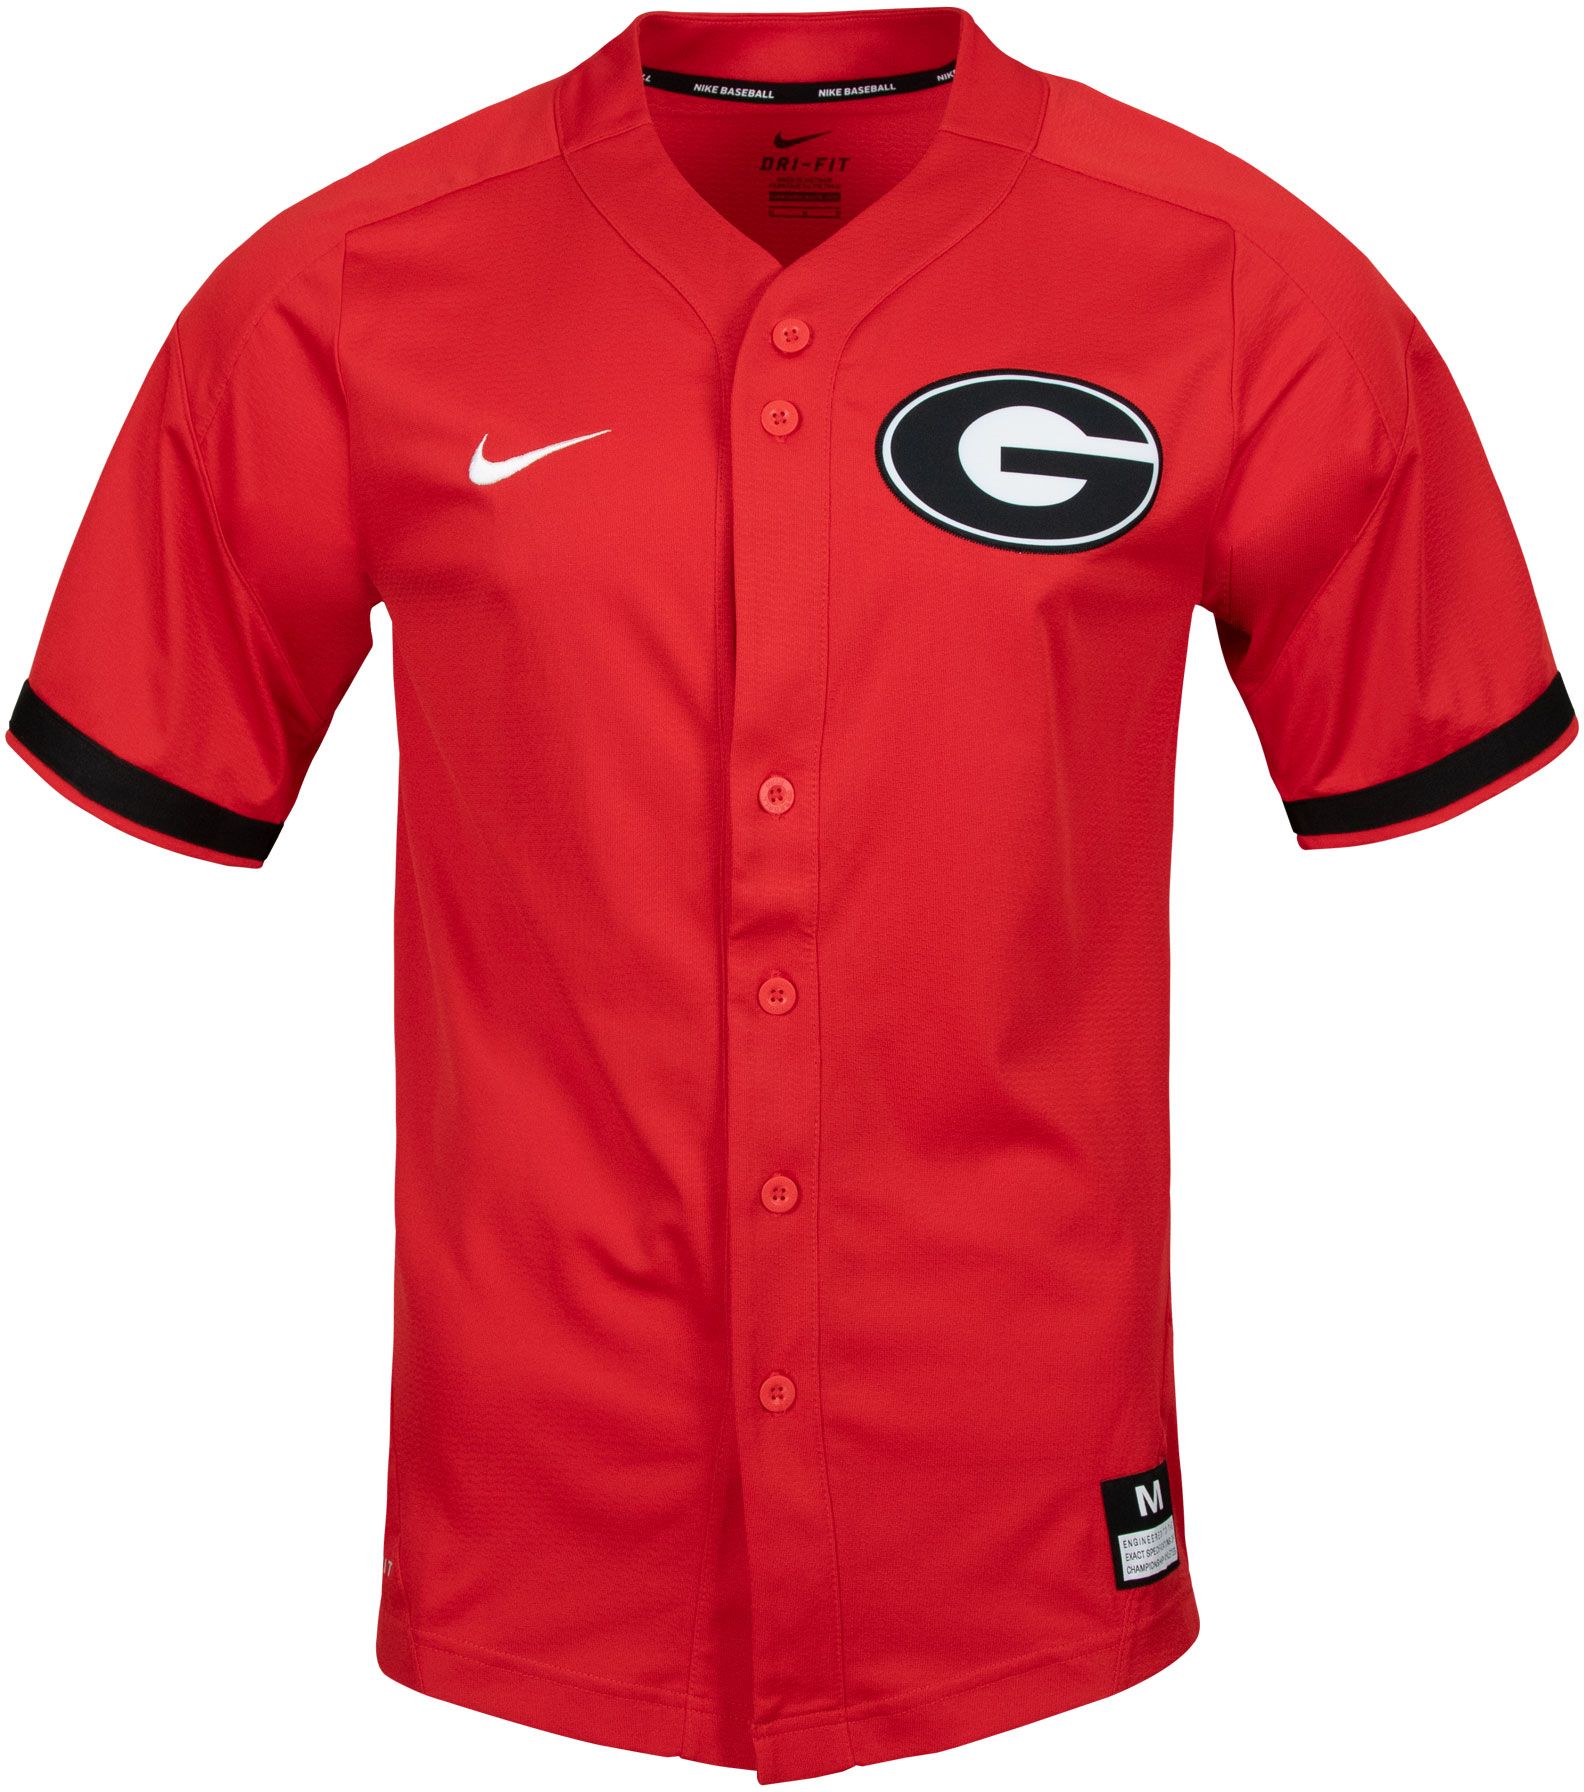 red and grey baseball jersey